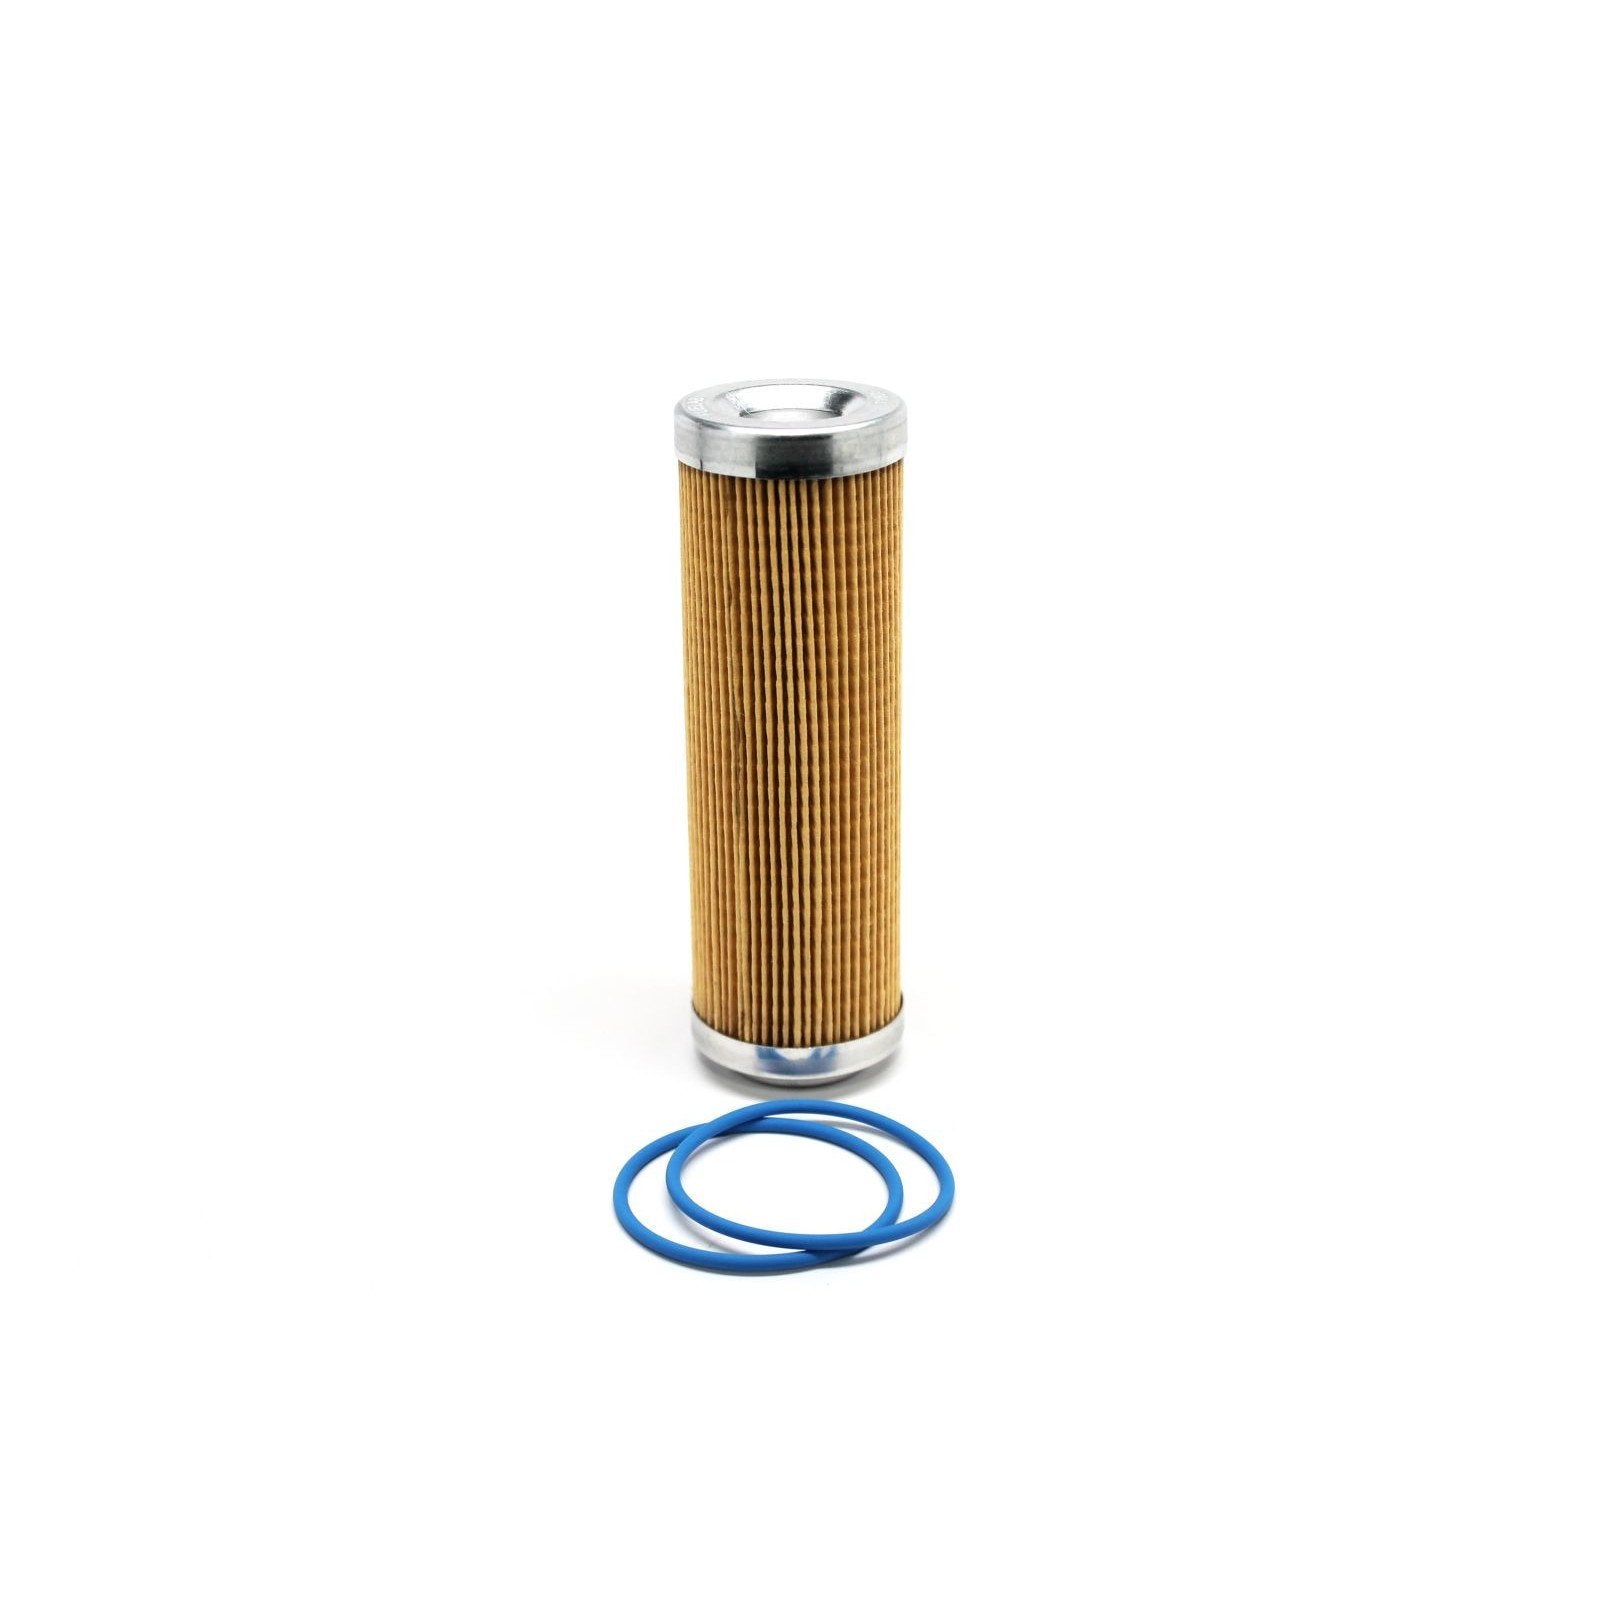 FUELAB replacement filter element replacement filter - PARTS33 GmbH